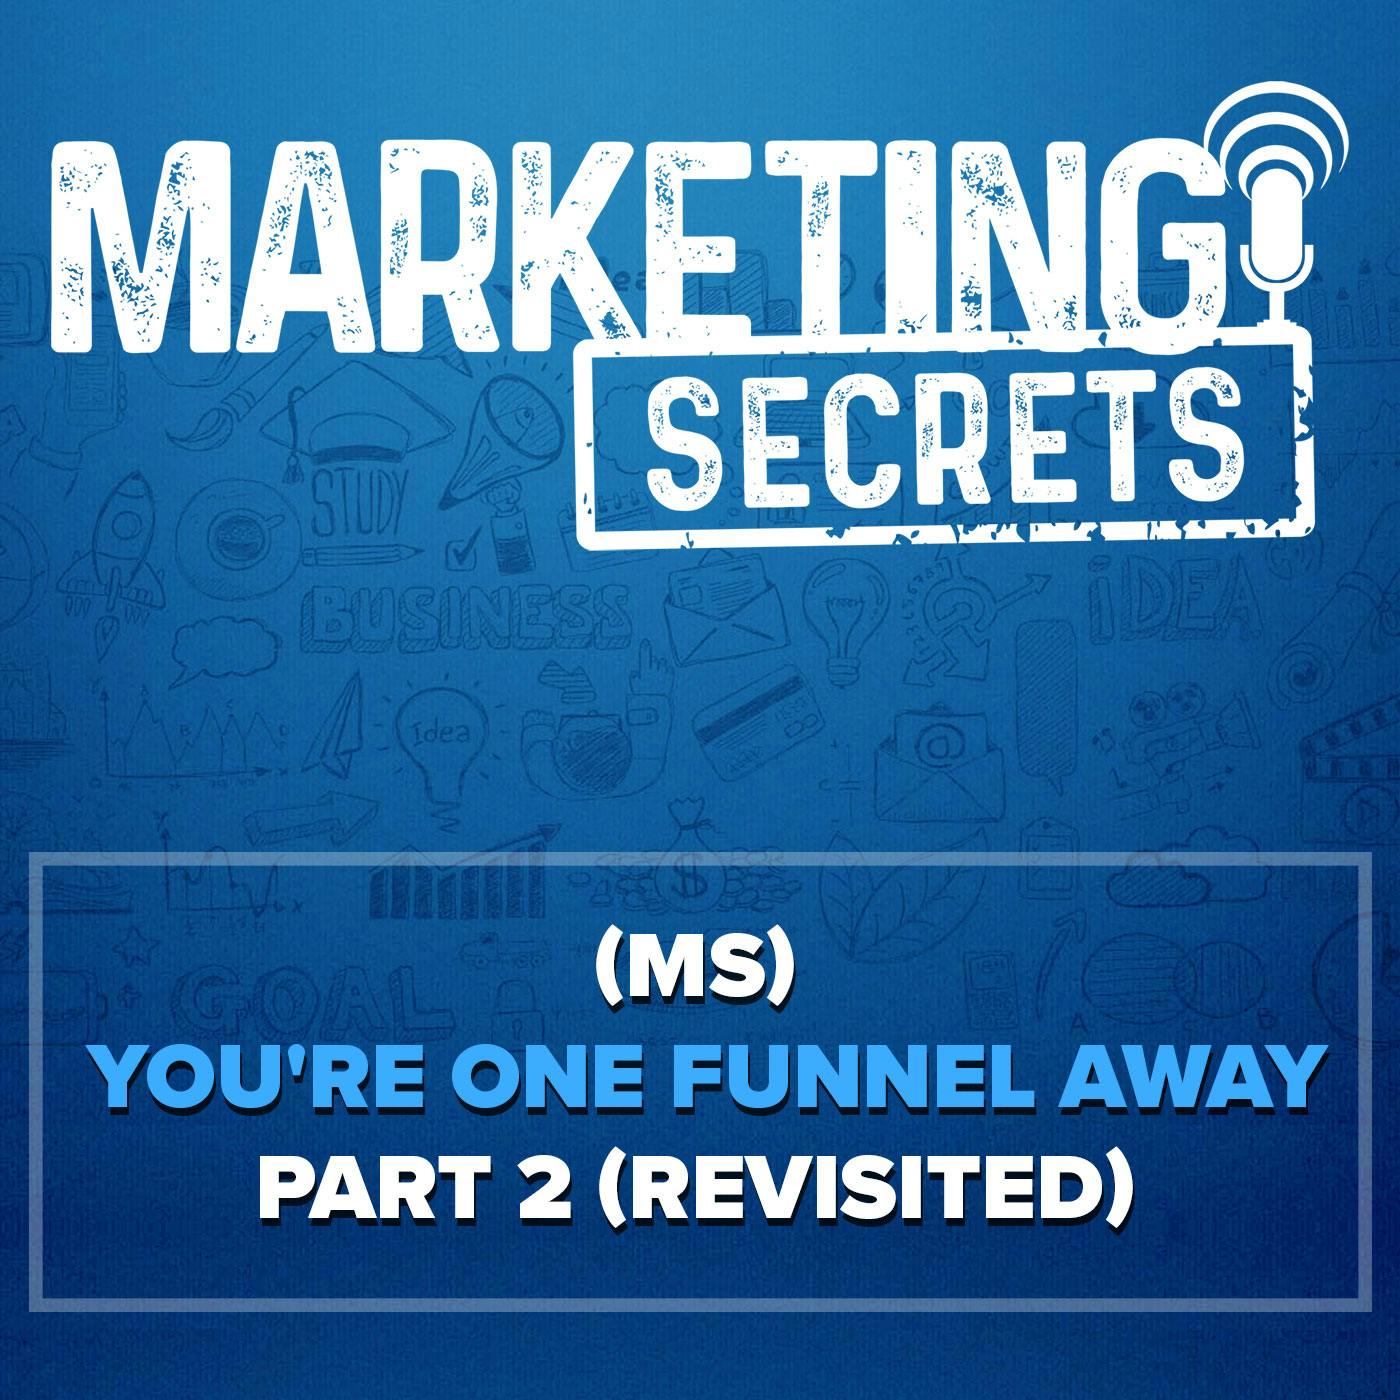 (MS) You're One Funnel Away - Part 2 (Revisited)